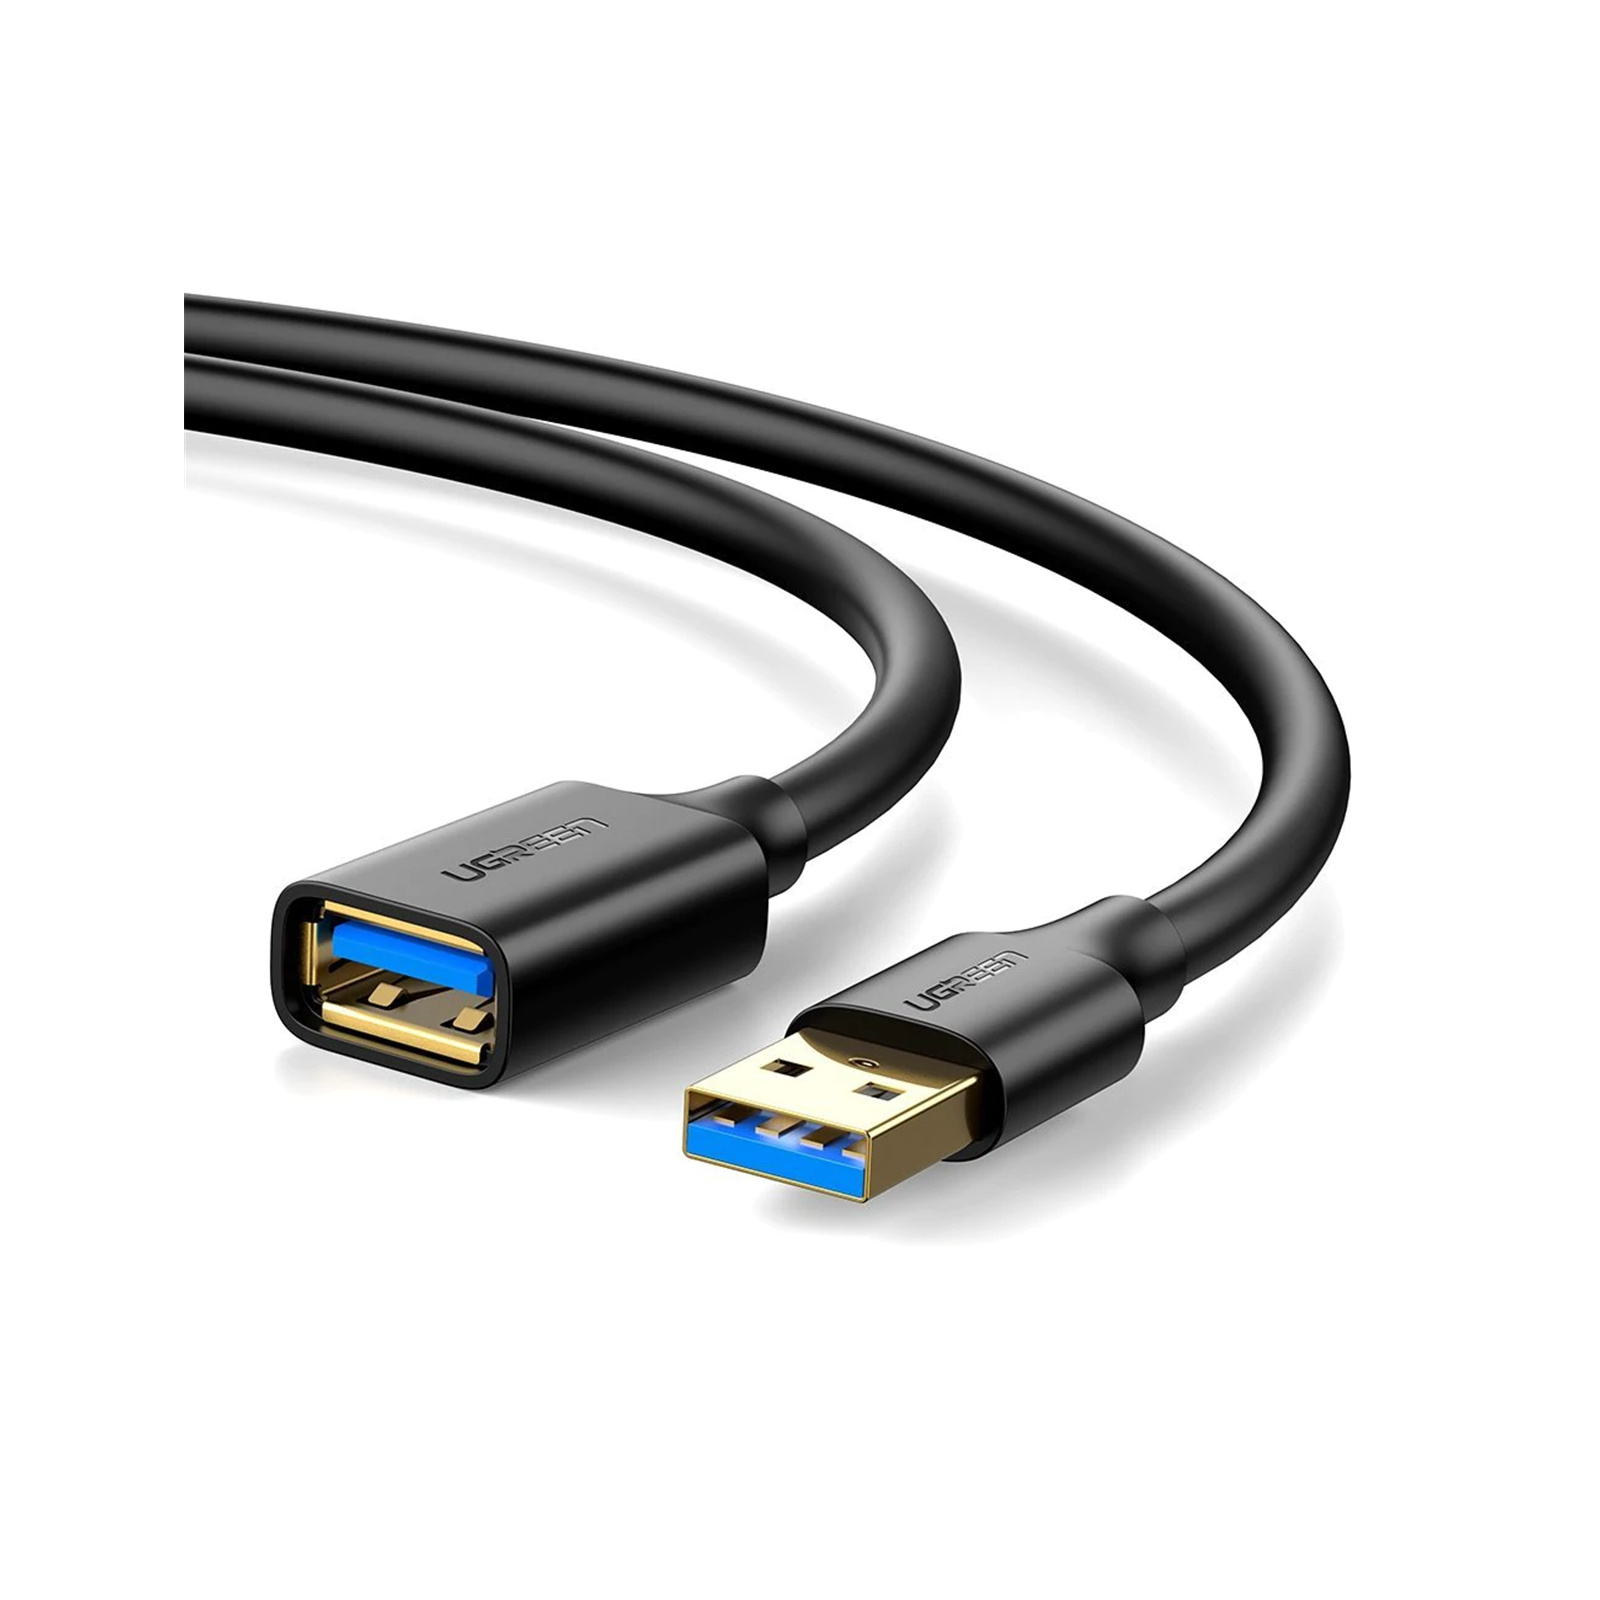 Buy the UGREEN 3.0 Extension Cable (A Male to A Female) Black 3M ( UG-30127 ) online - PBTech.com